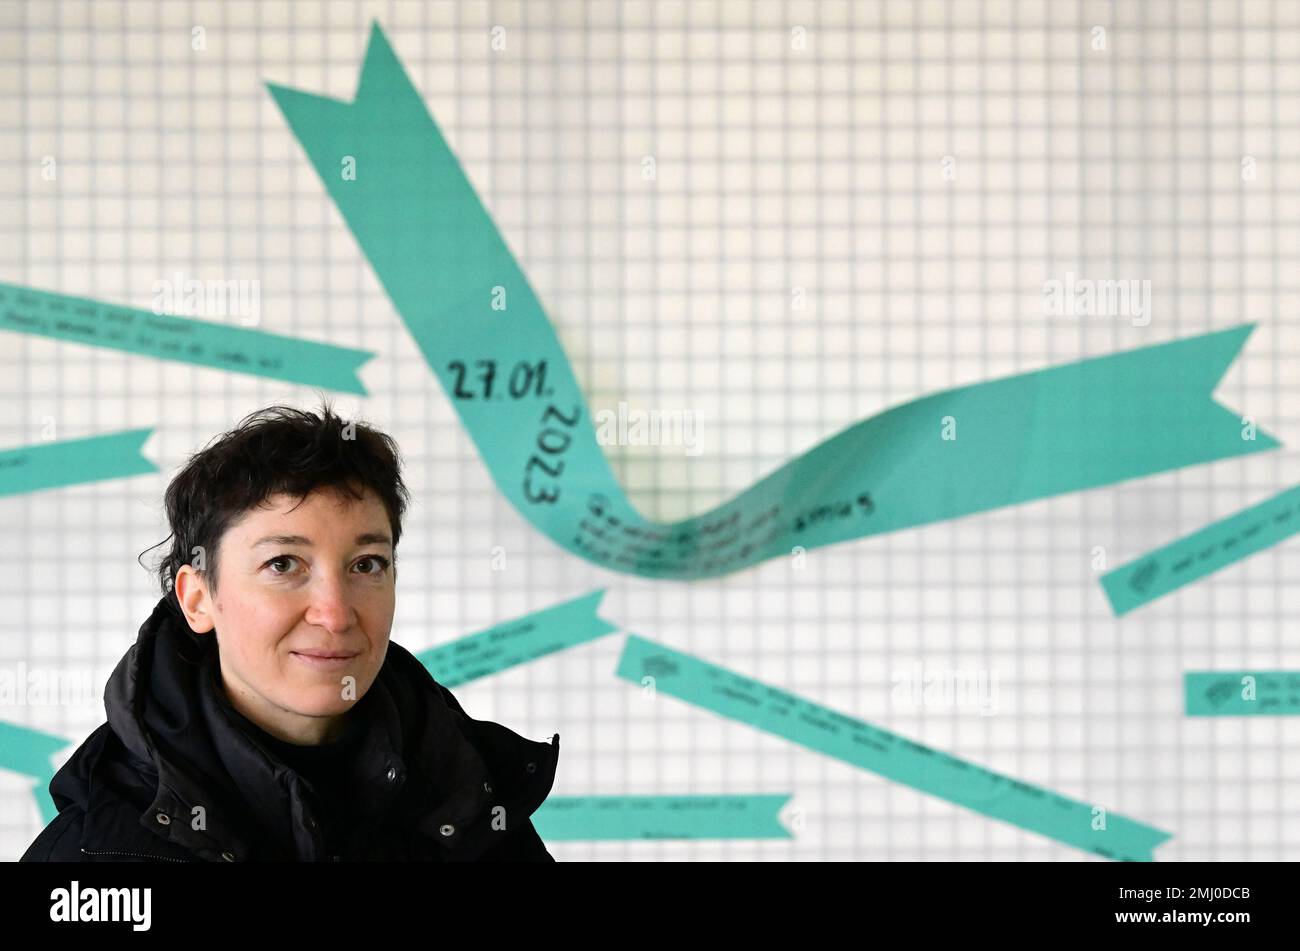 27 January 2023, Brandenburg, Oranienburg: The Berlin artist Susanne Quehenberger stands in the interior of 'Station Z' of the Sachsenhausen Memorial and Museum in front of a wall with labeled adhesive tapes. During a joint commemoration event of the Brandenburg State Parliament and the memorial site, the cultural scientist's tape art action with the question 'Why do you remember today?' was performed for the first time instead of laying a wreath. In addition to the visitors to the memorial, more than 90 people had responded to the memorial's call and had previously shared their contributions Stock Photo